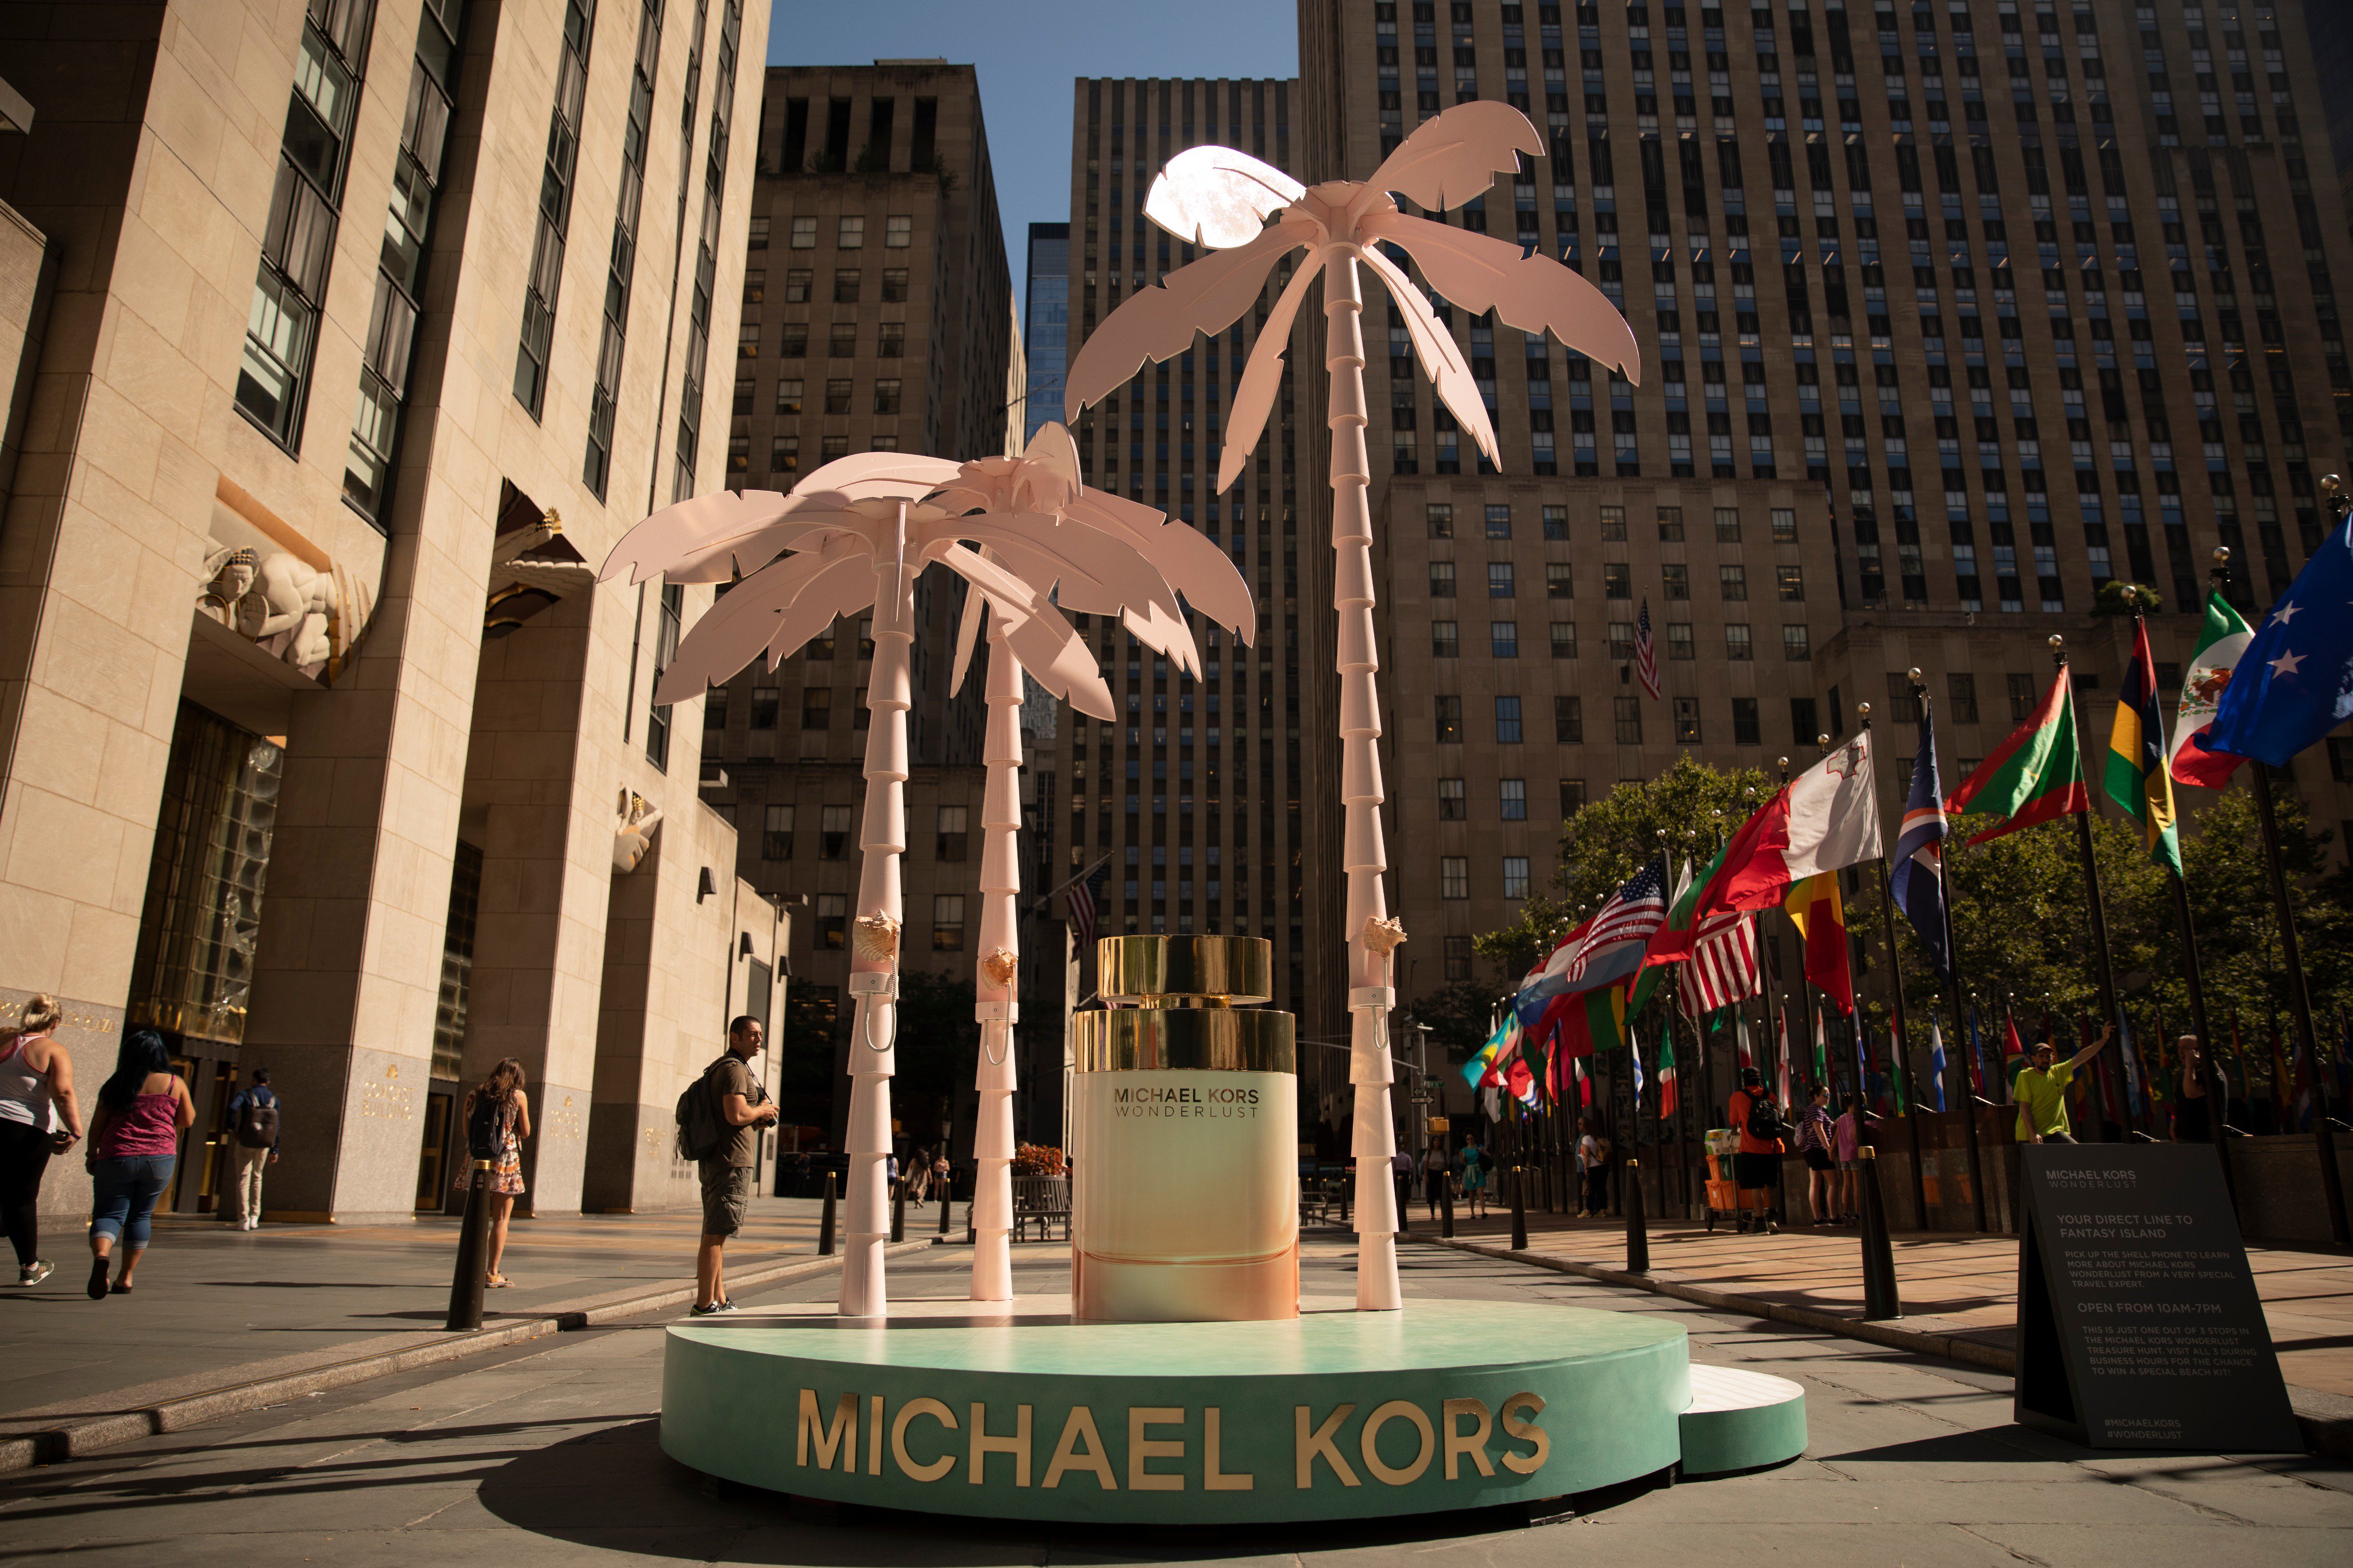 Adskillelse kæmpe Inspektør Michael Kors on Twitter: "The search is on: join us at the Michael Kors  #Wonderlust treasure hunt today and tomorrow for photo ops, prizes and  more! 📍Rockefeller Center https://t.co/h6KFYK4HKL" / Twitter